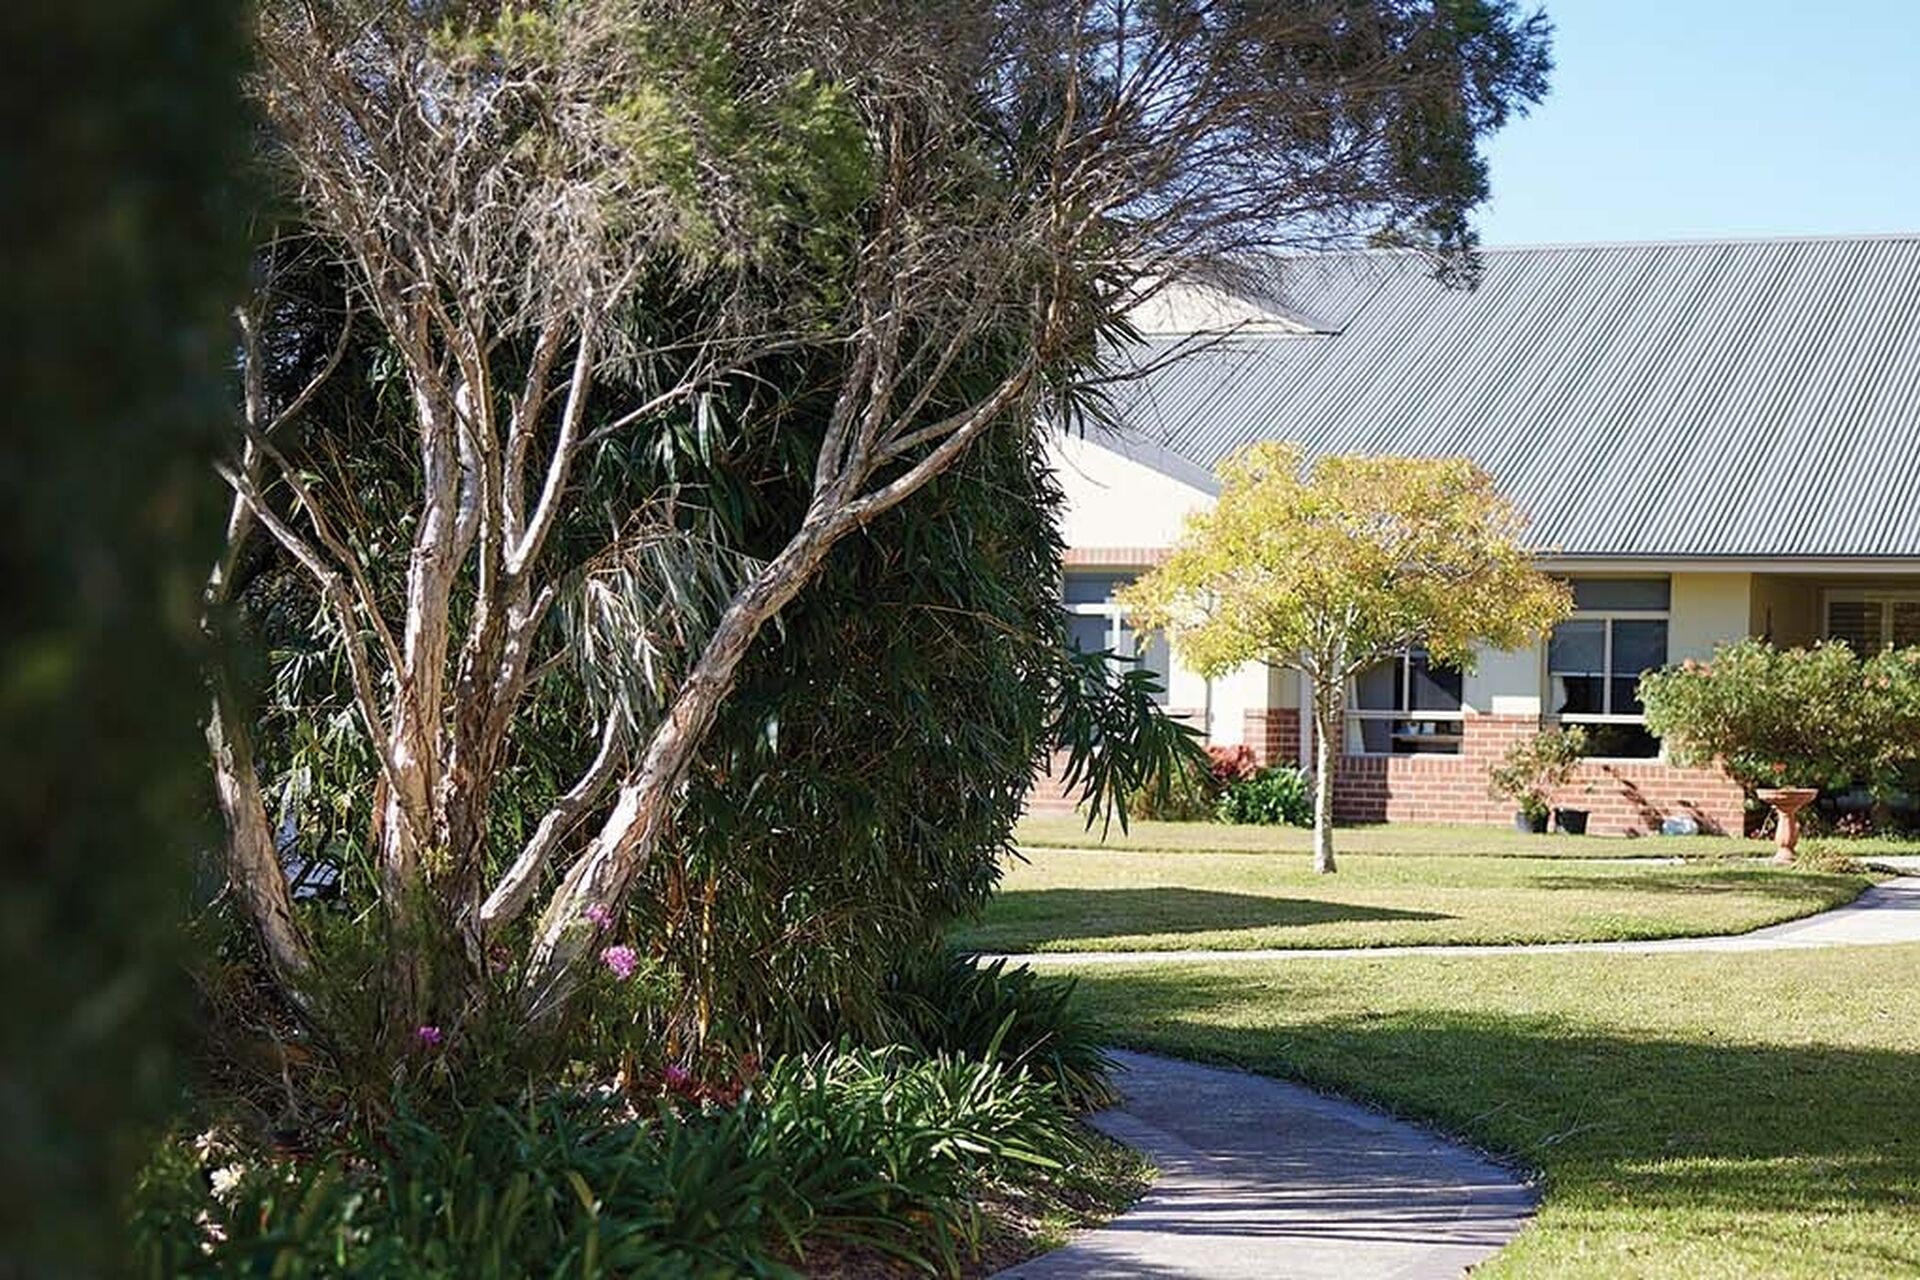 frontage of baptistcare bethshan gardens centre aged care home in wyee nsw lake macquarie with large trees